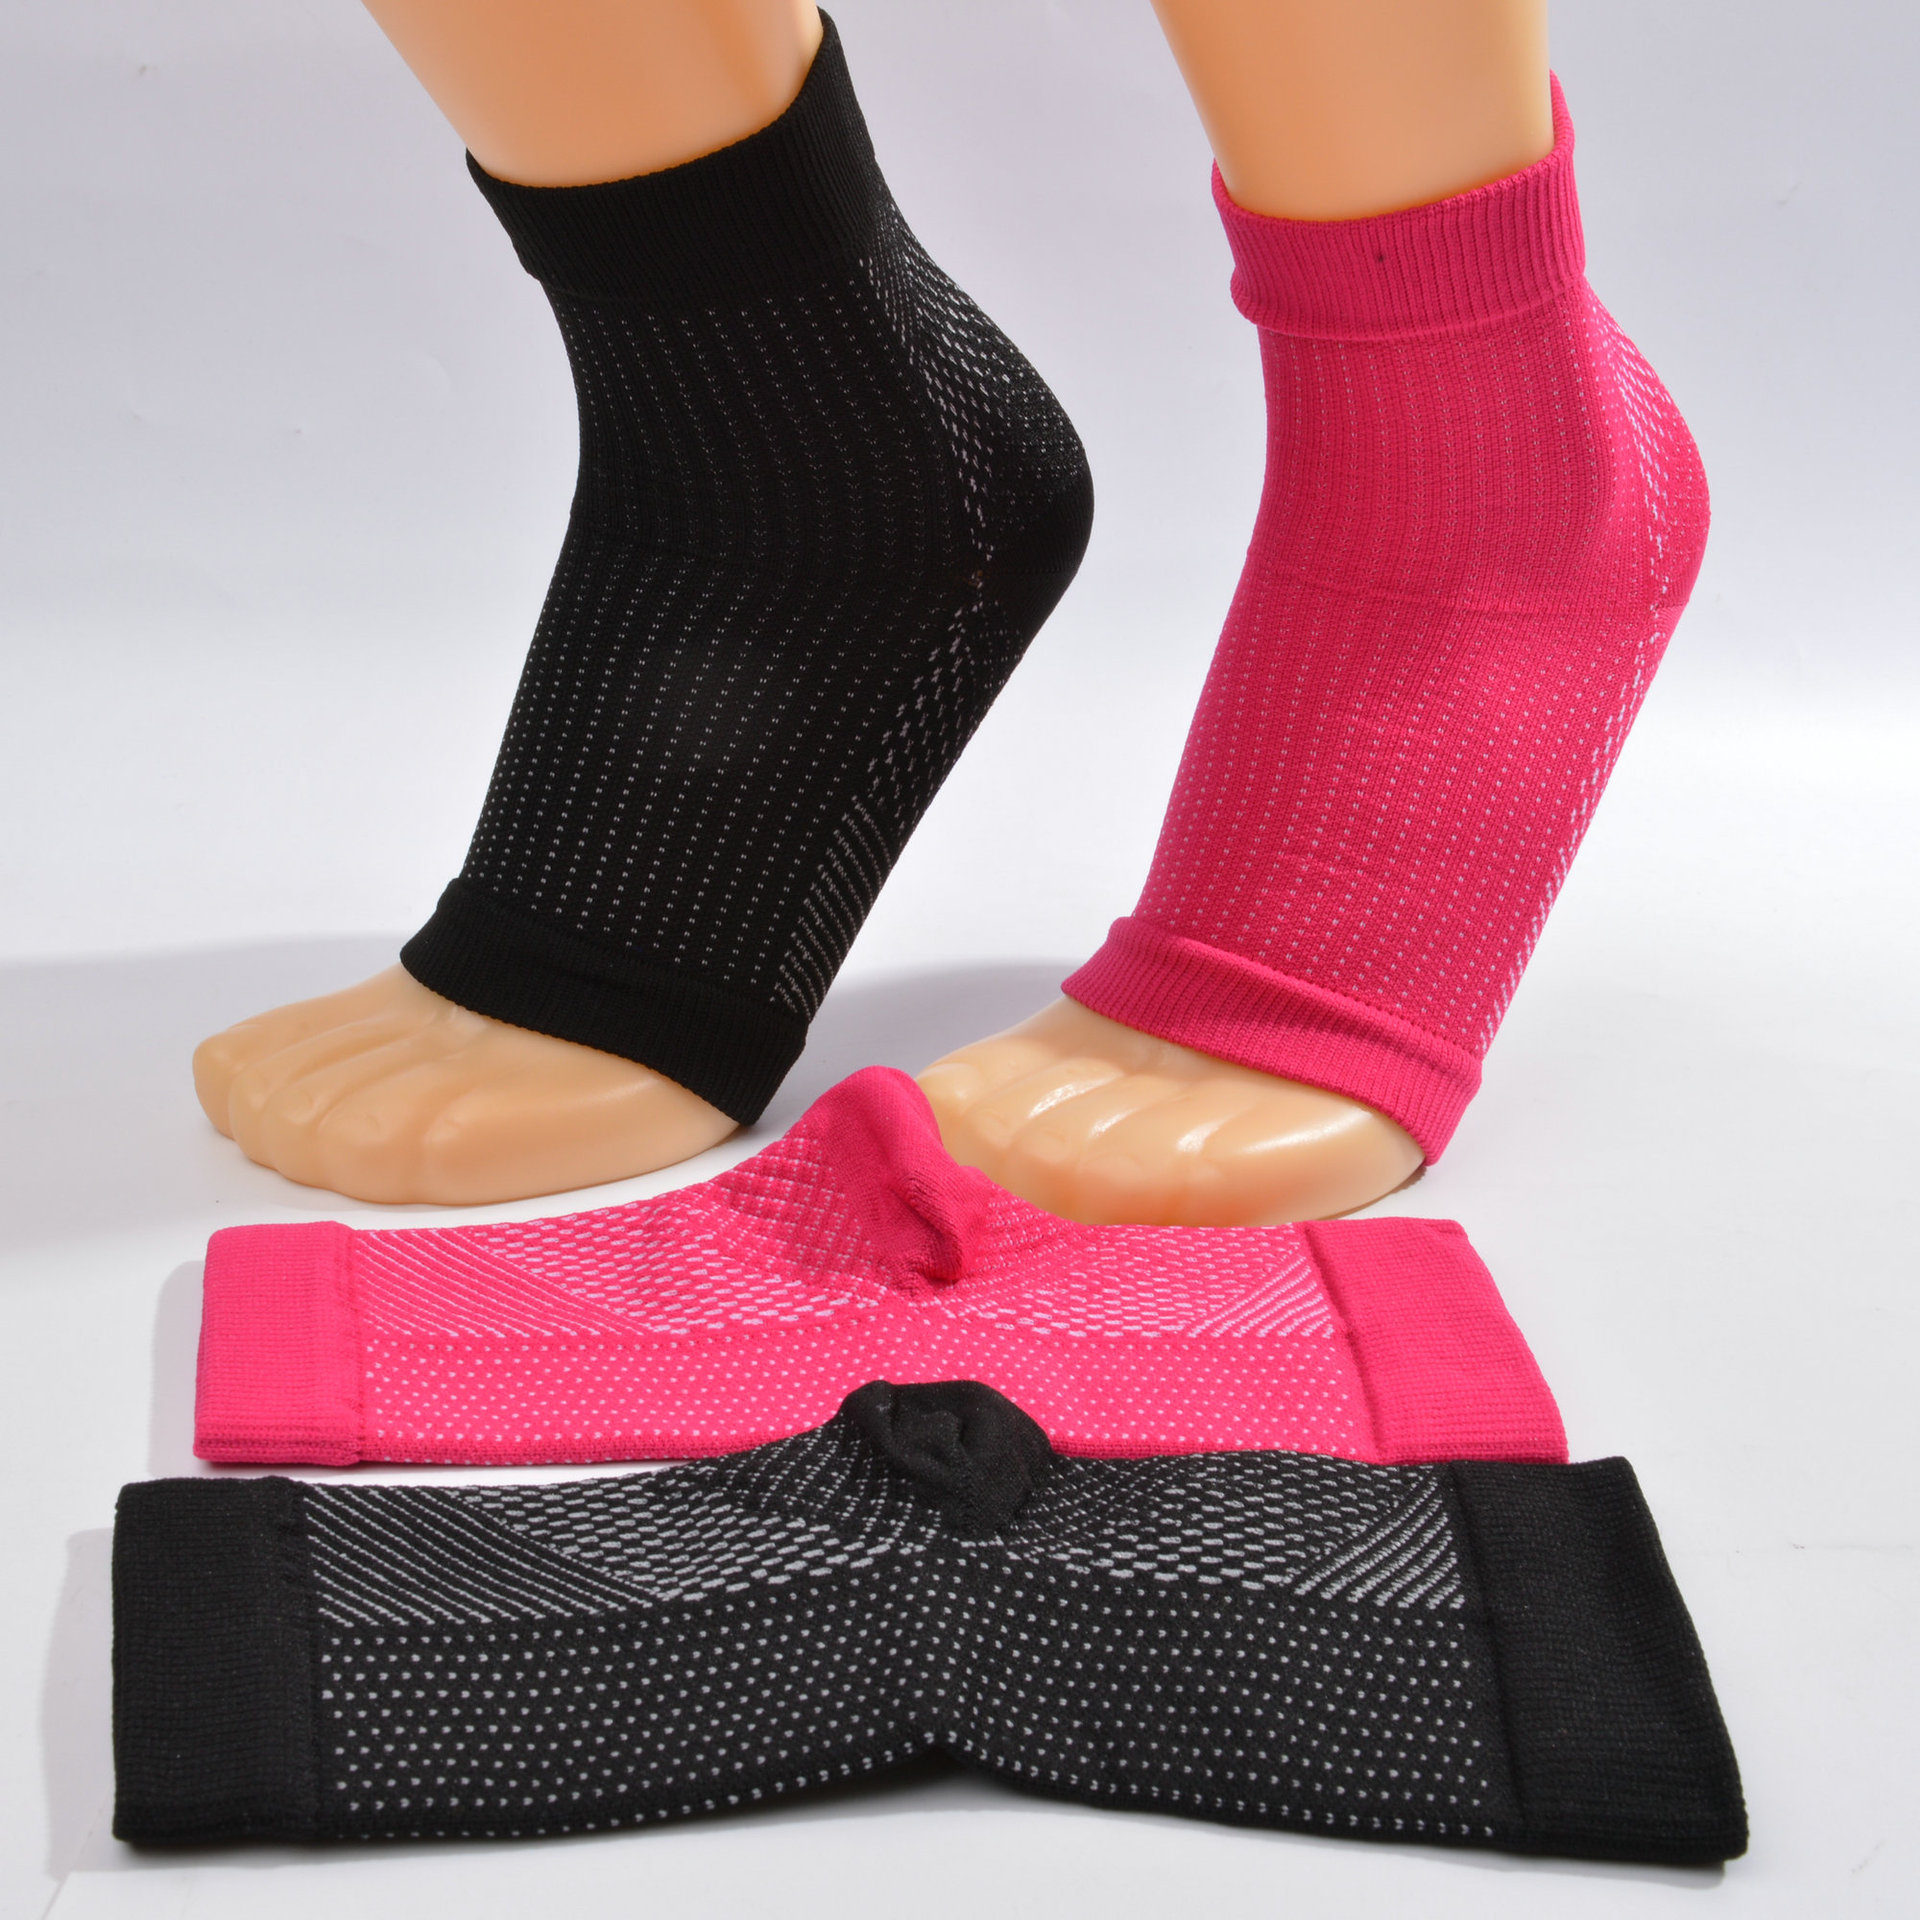 Manufacturers spot compressed socks to protect the ankle foot wrist sports protective joint elastic socks foot bottom fascia stress socks